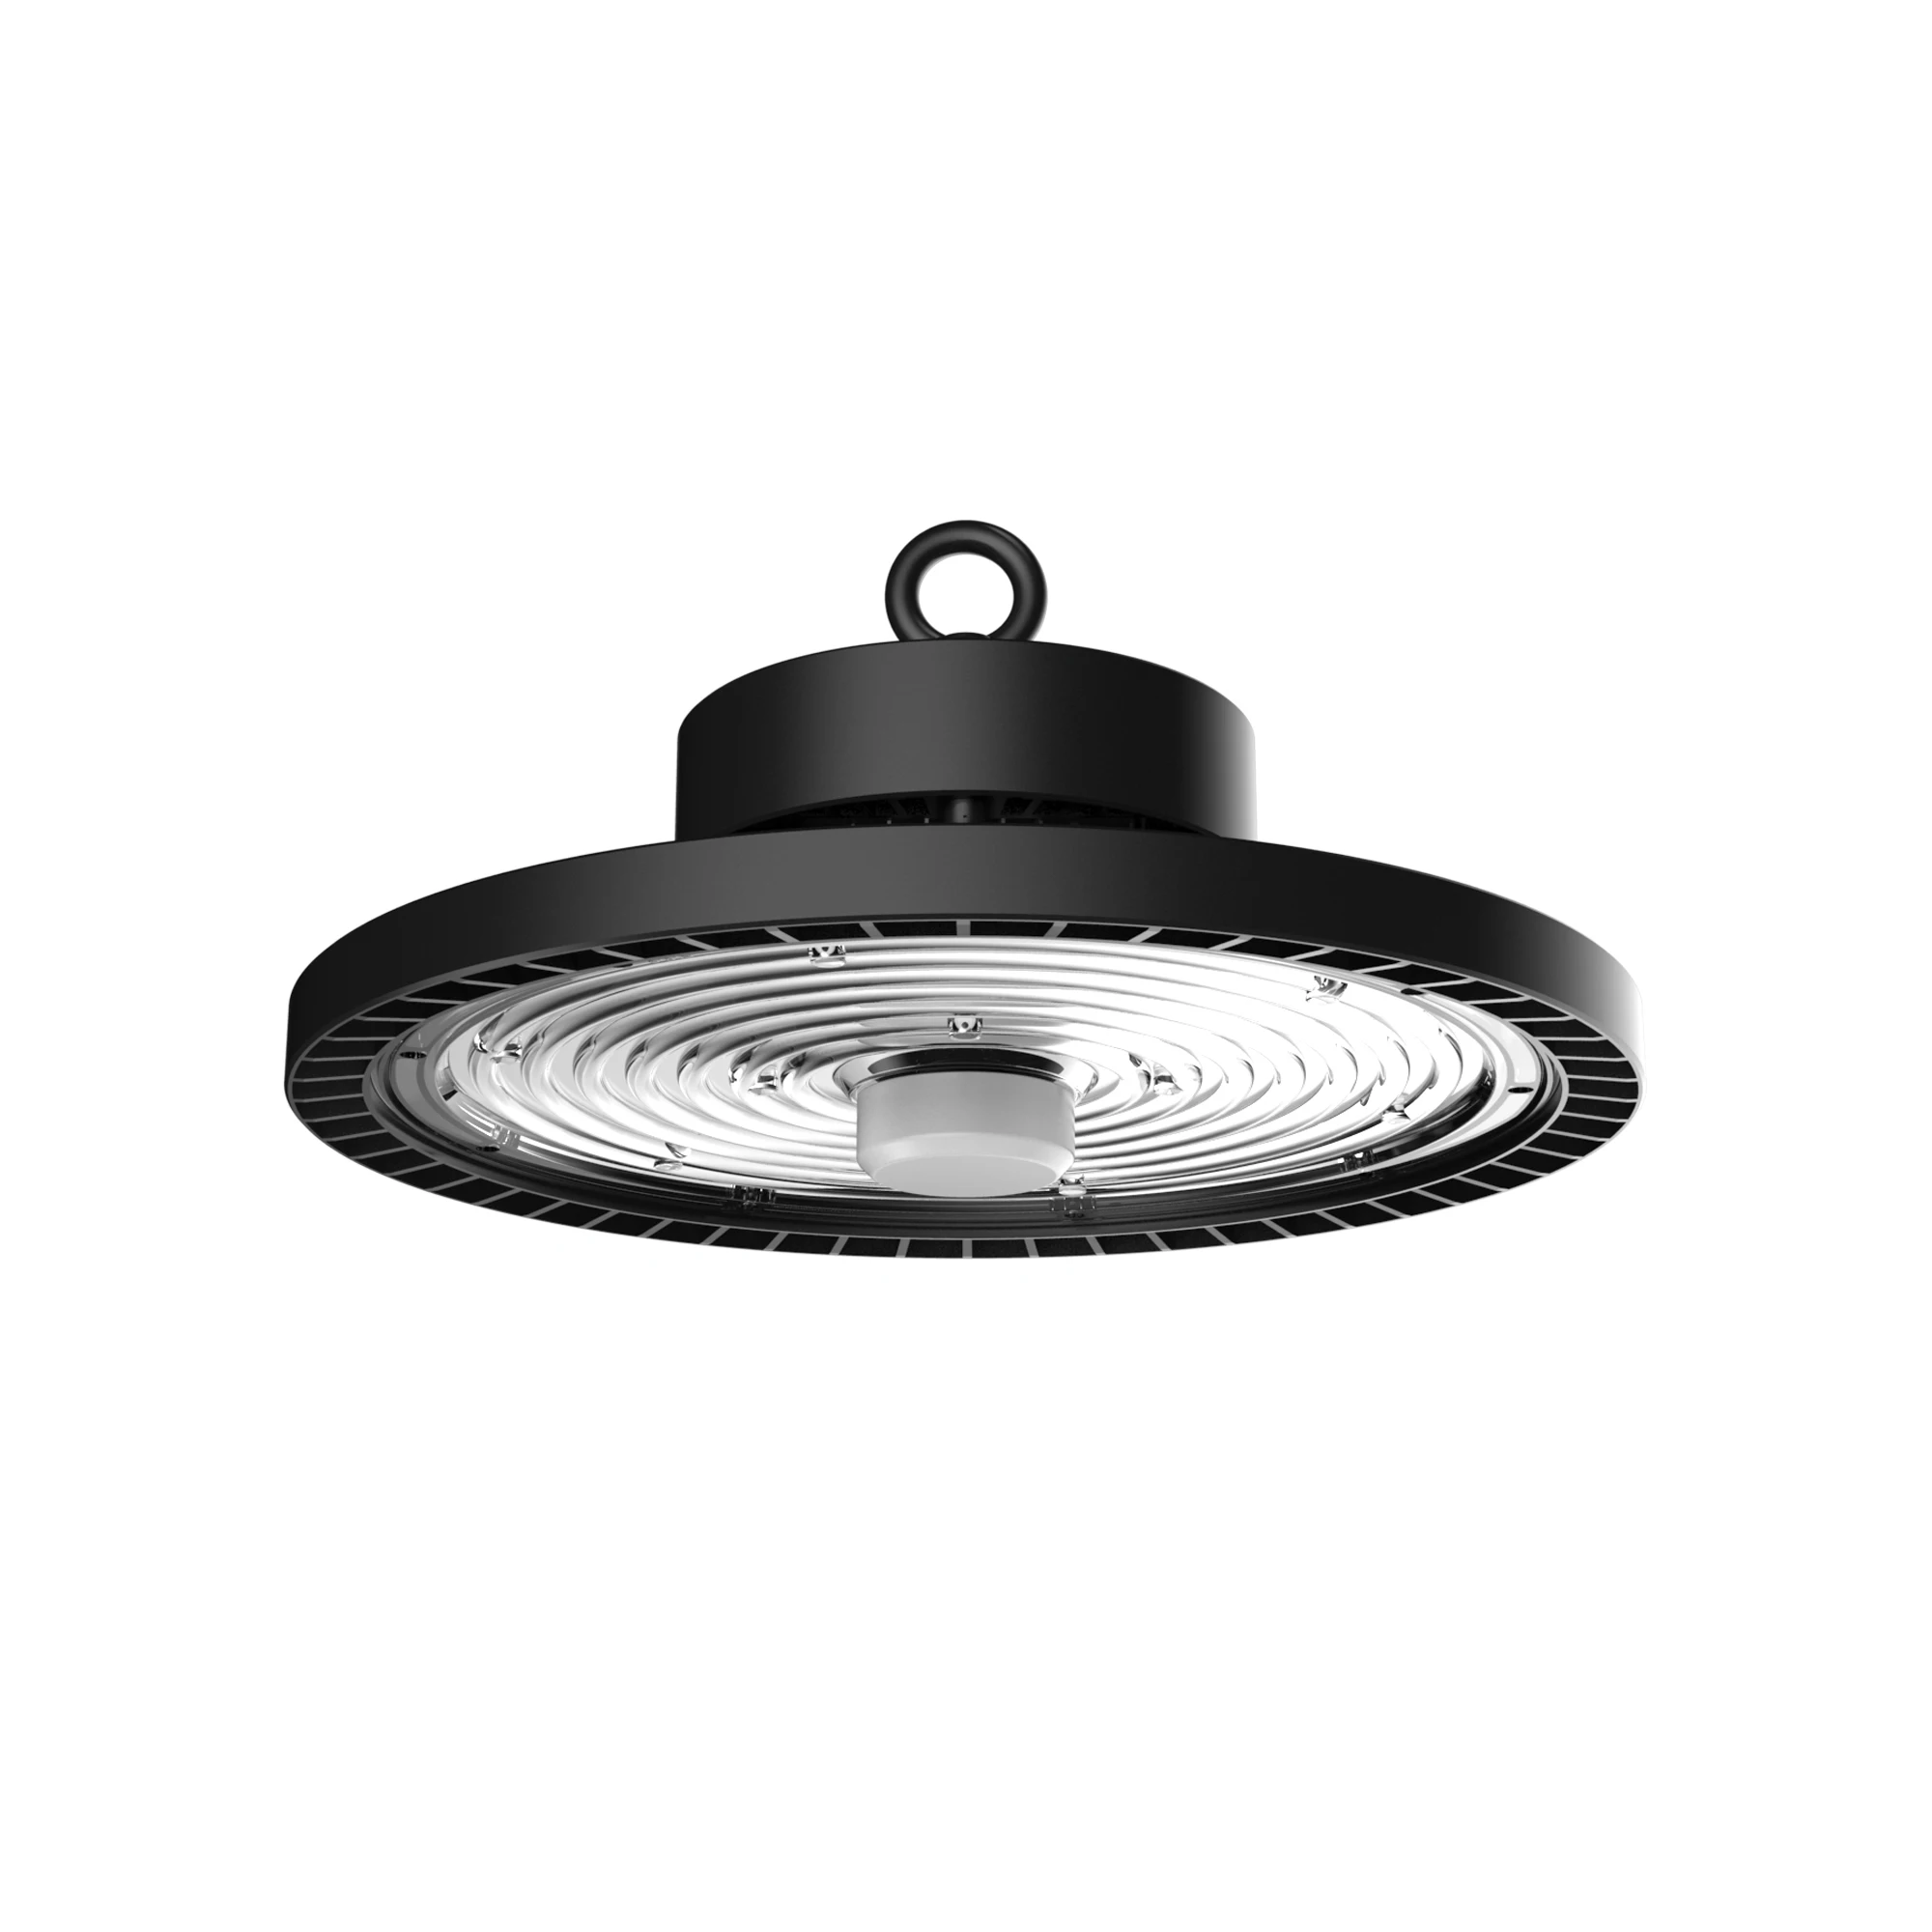 Constant lux IP65 80W 100W 120W 150W 200W dimmable LED UFO highbay warehouse light